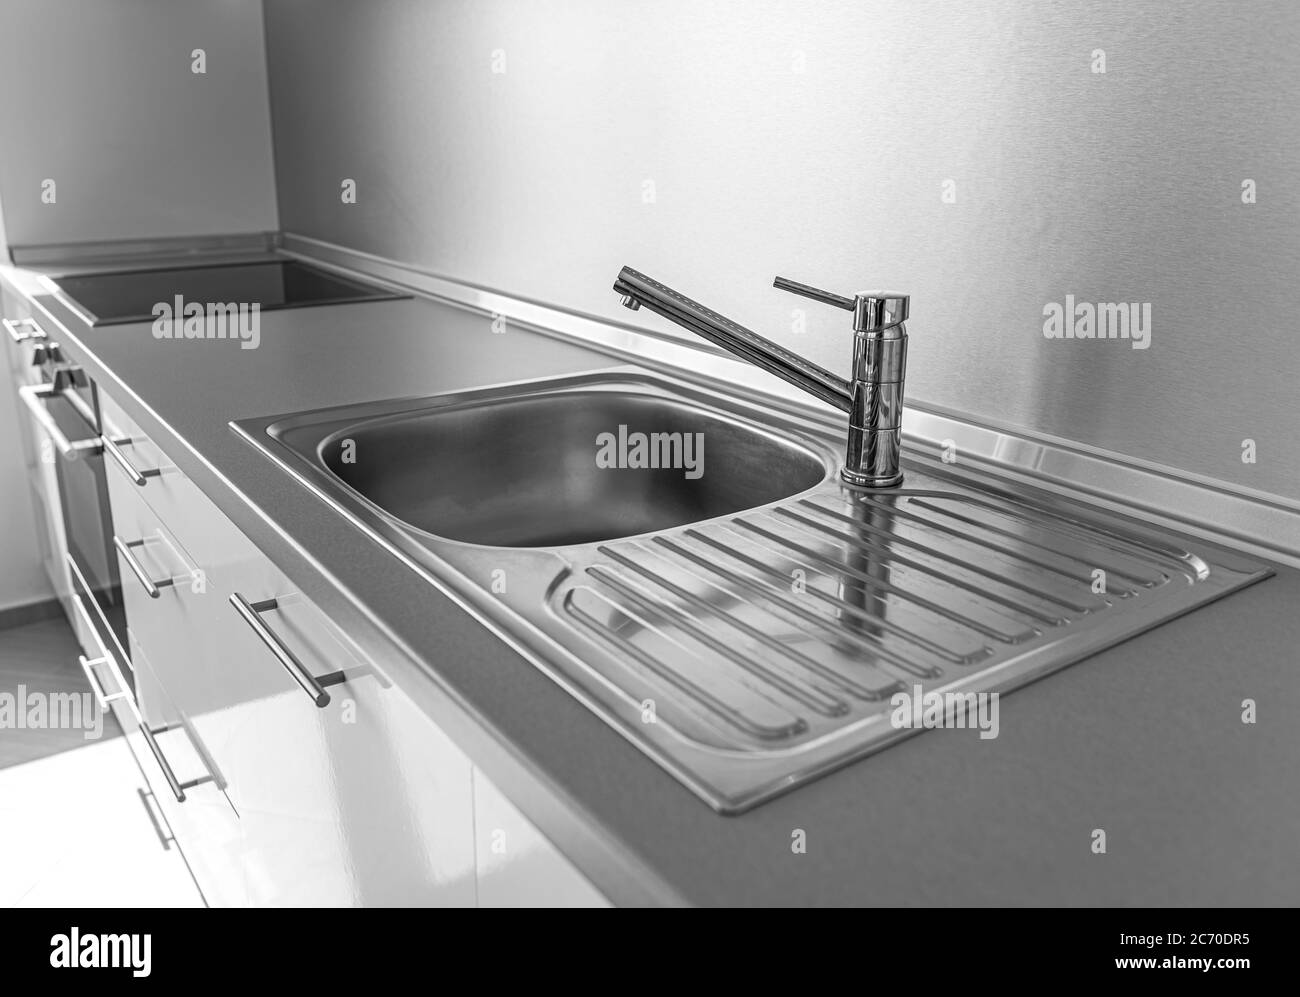 Kitchen sink and faucet on an kitchen worktop. Stock Photo